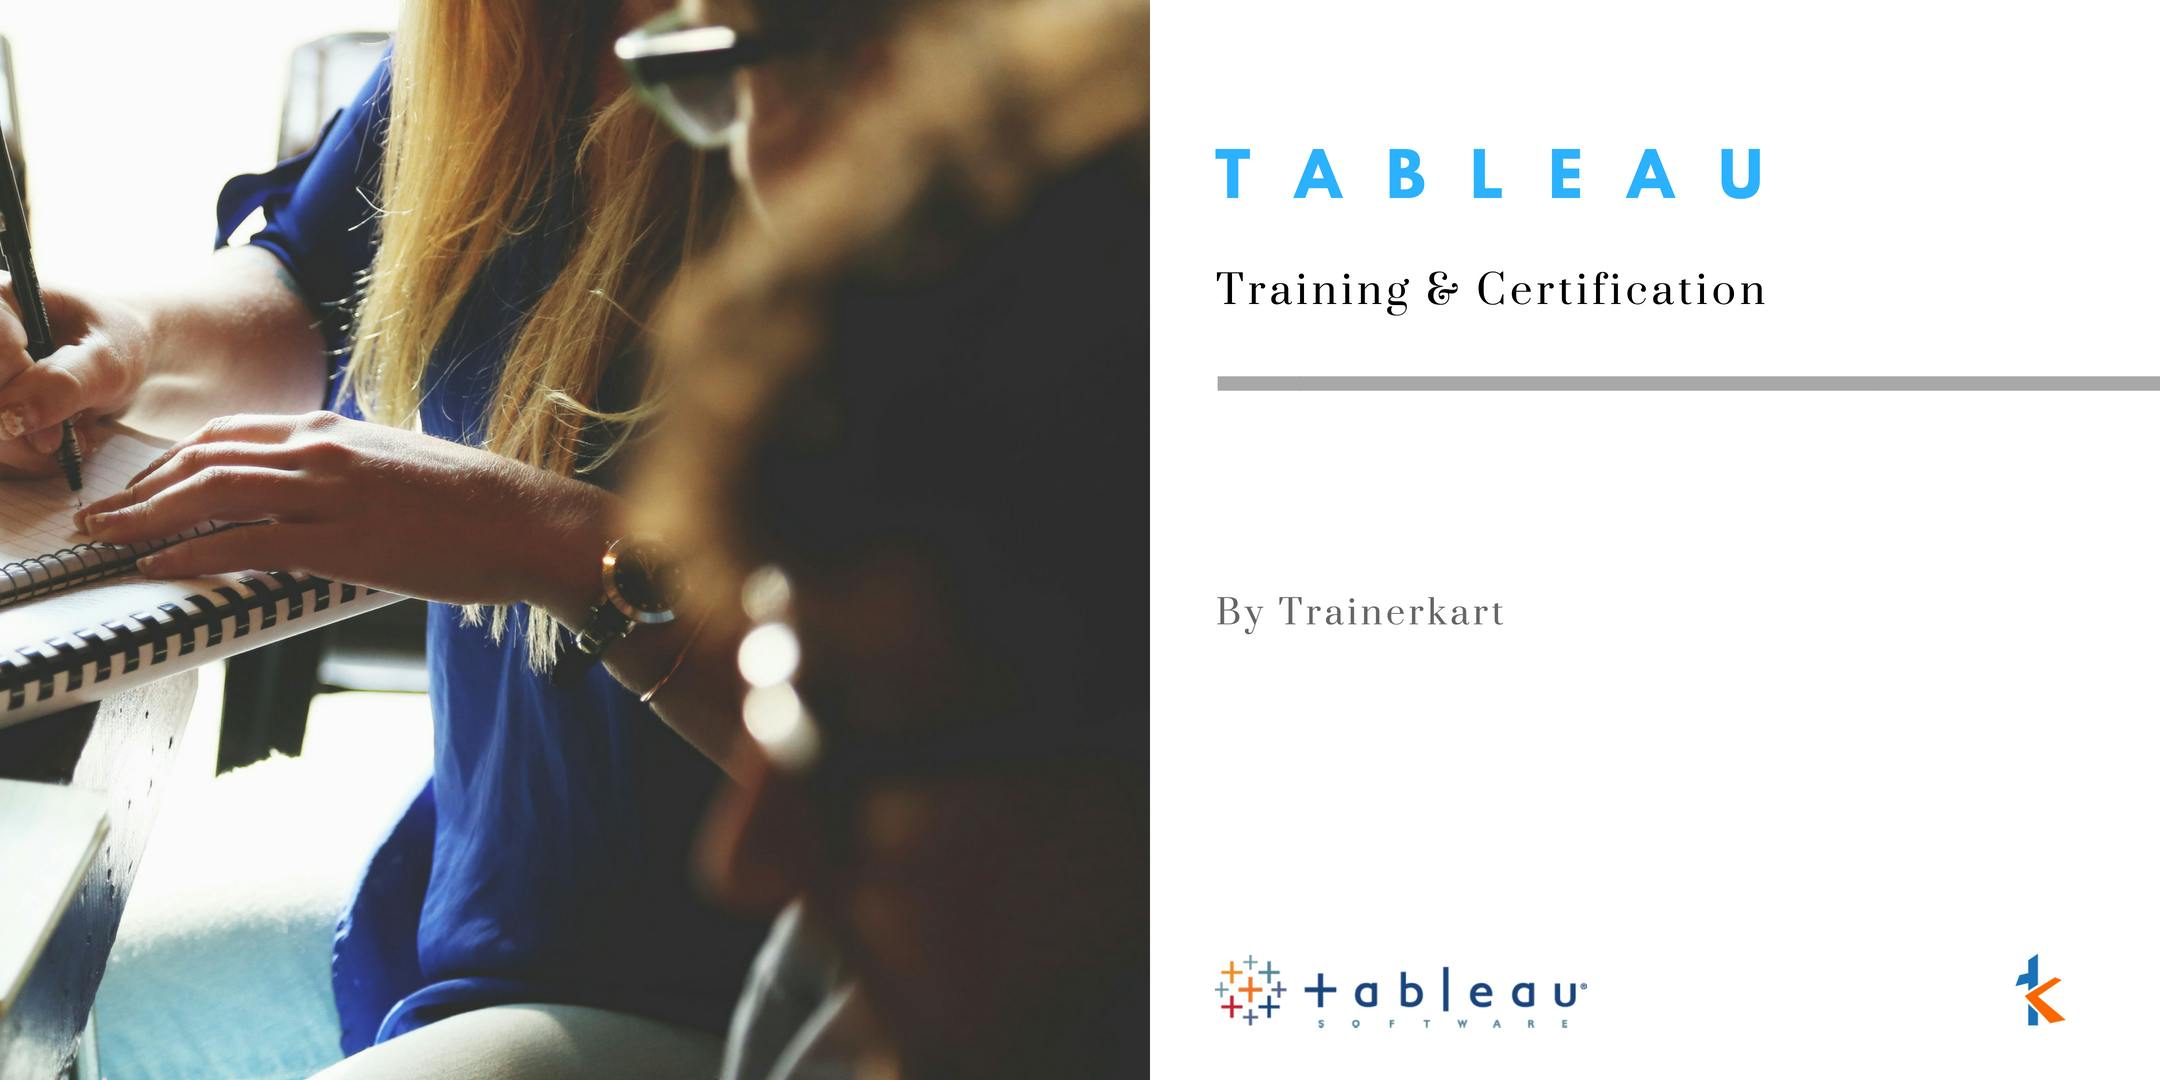 Tableau Classroom Training & Certification in Wilmington, NC